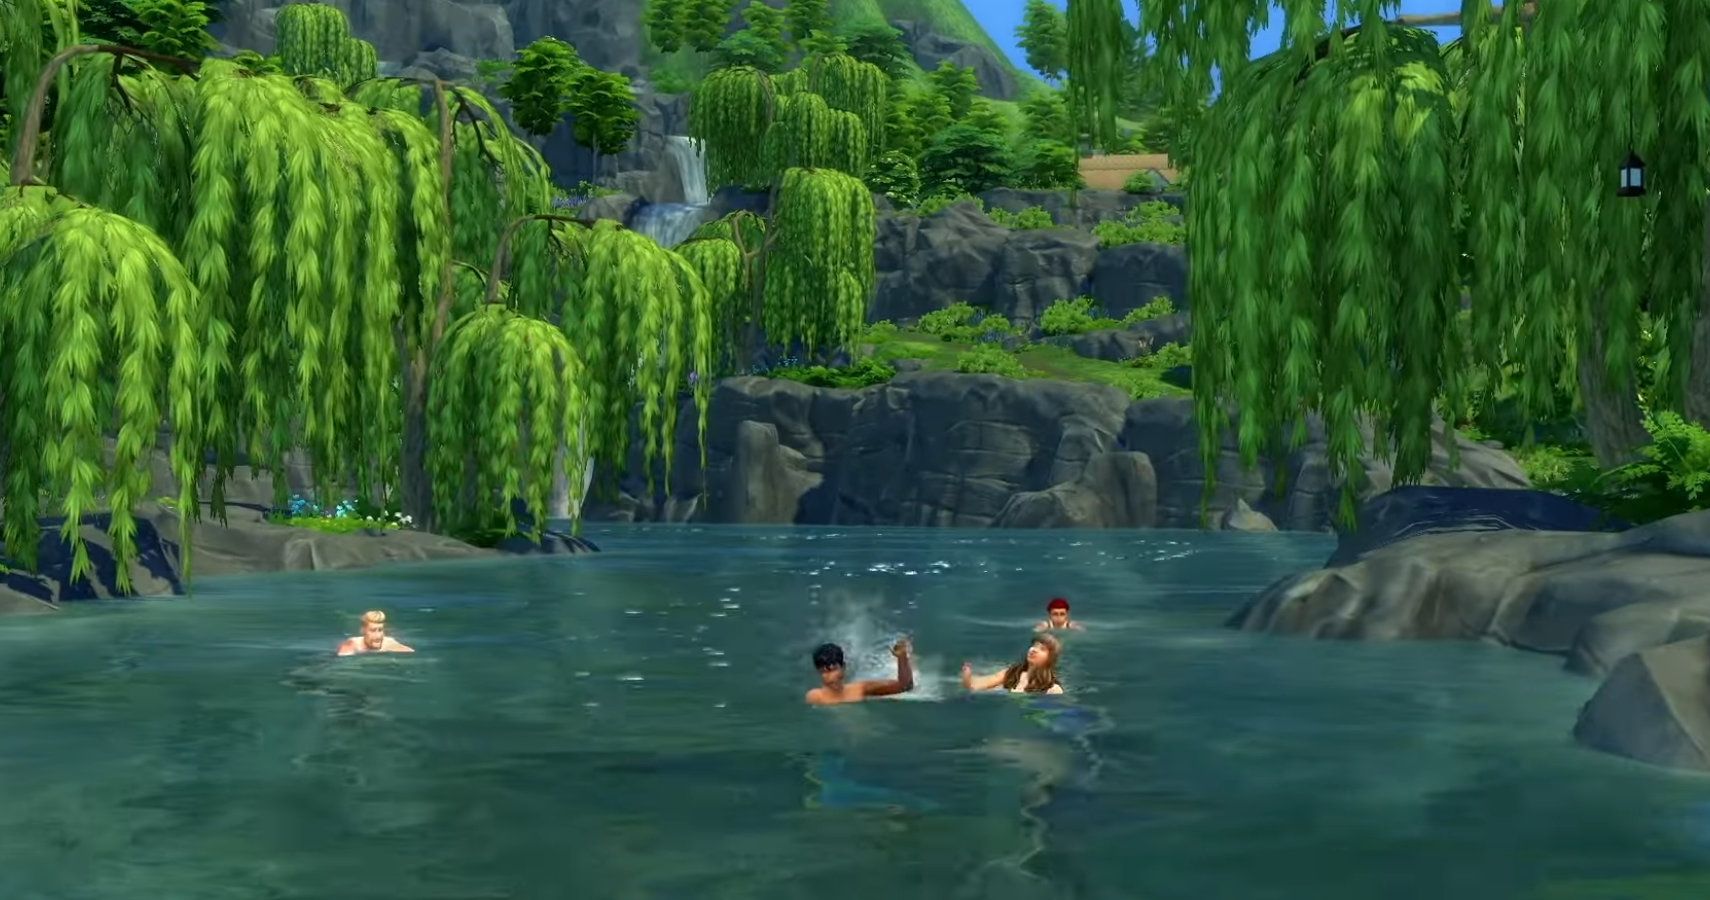 Sims swimming in the village